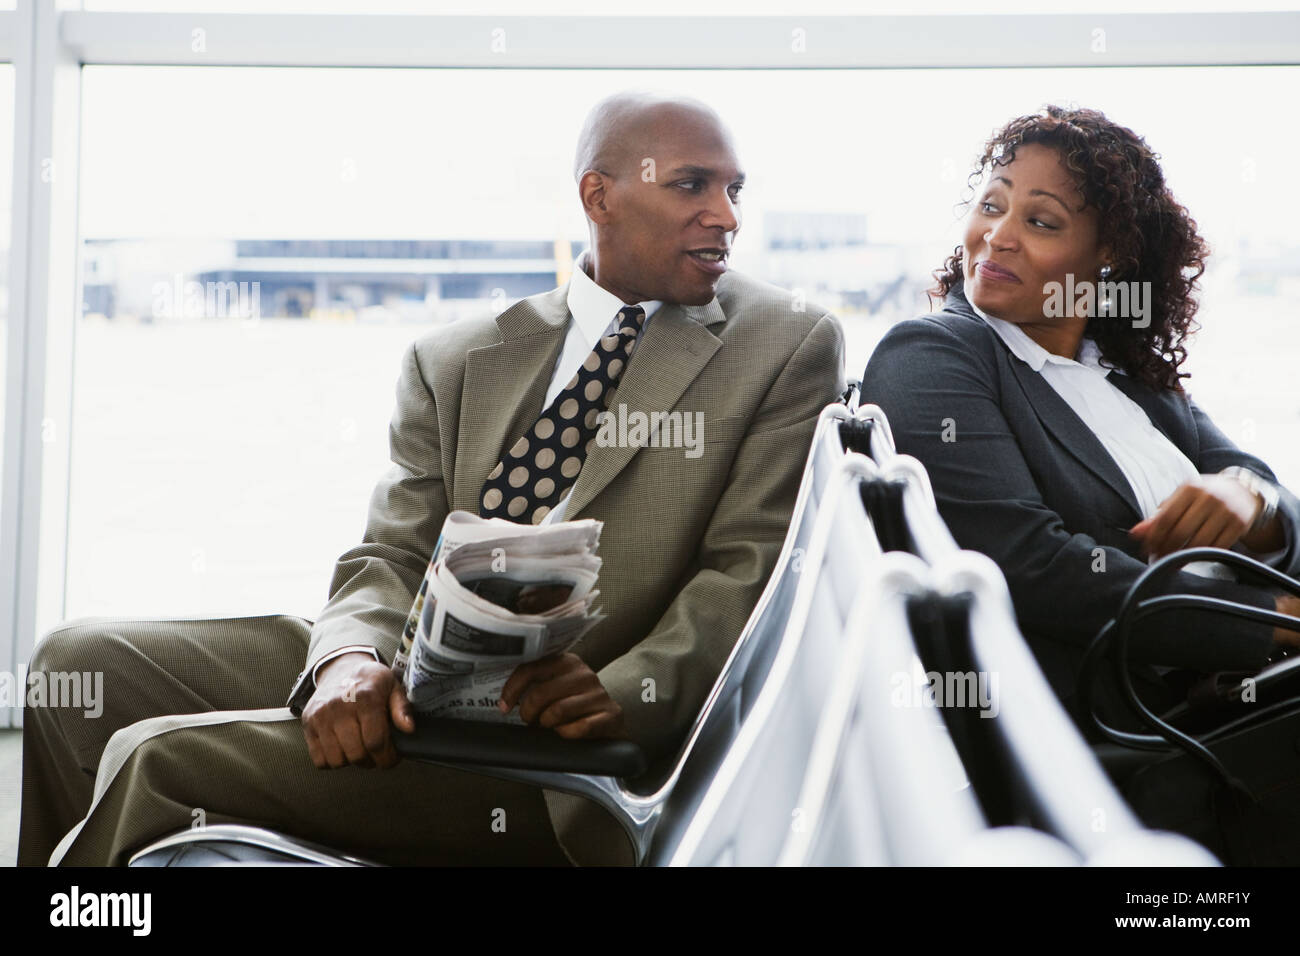 African businesspeople in airport waiting area Stock Photo